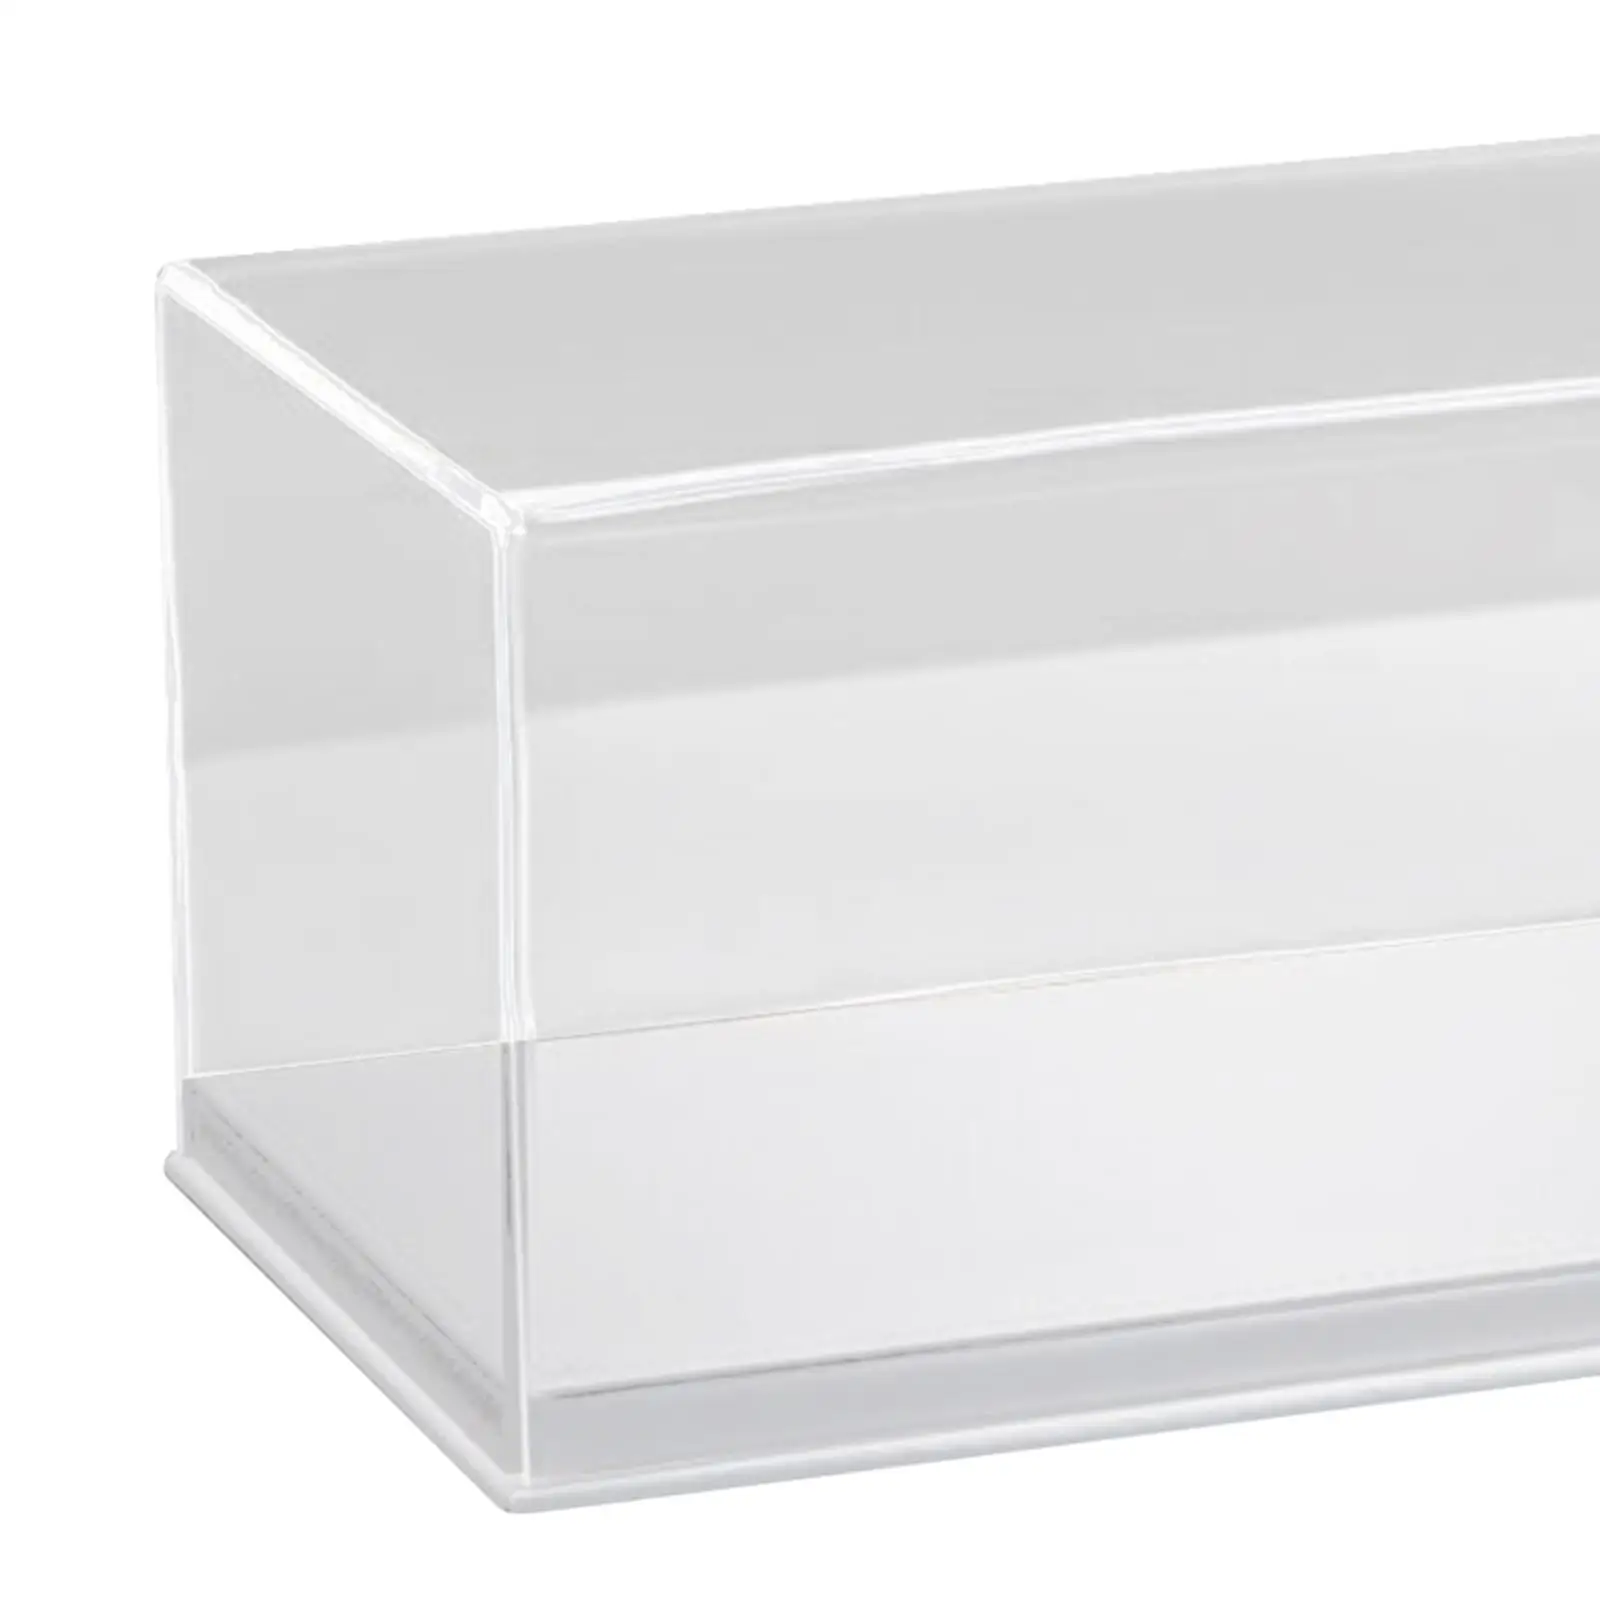 Clear Acrylic Display Case, Countertop for 1:64 Scale Model Cars, Durable, Organizer ,Protection Showcase for Model Cars